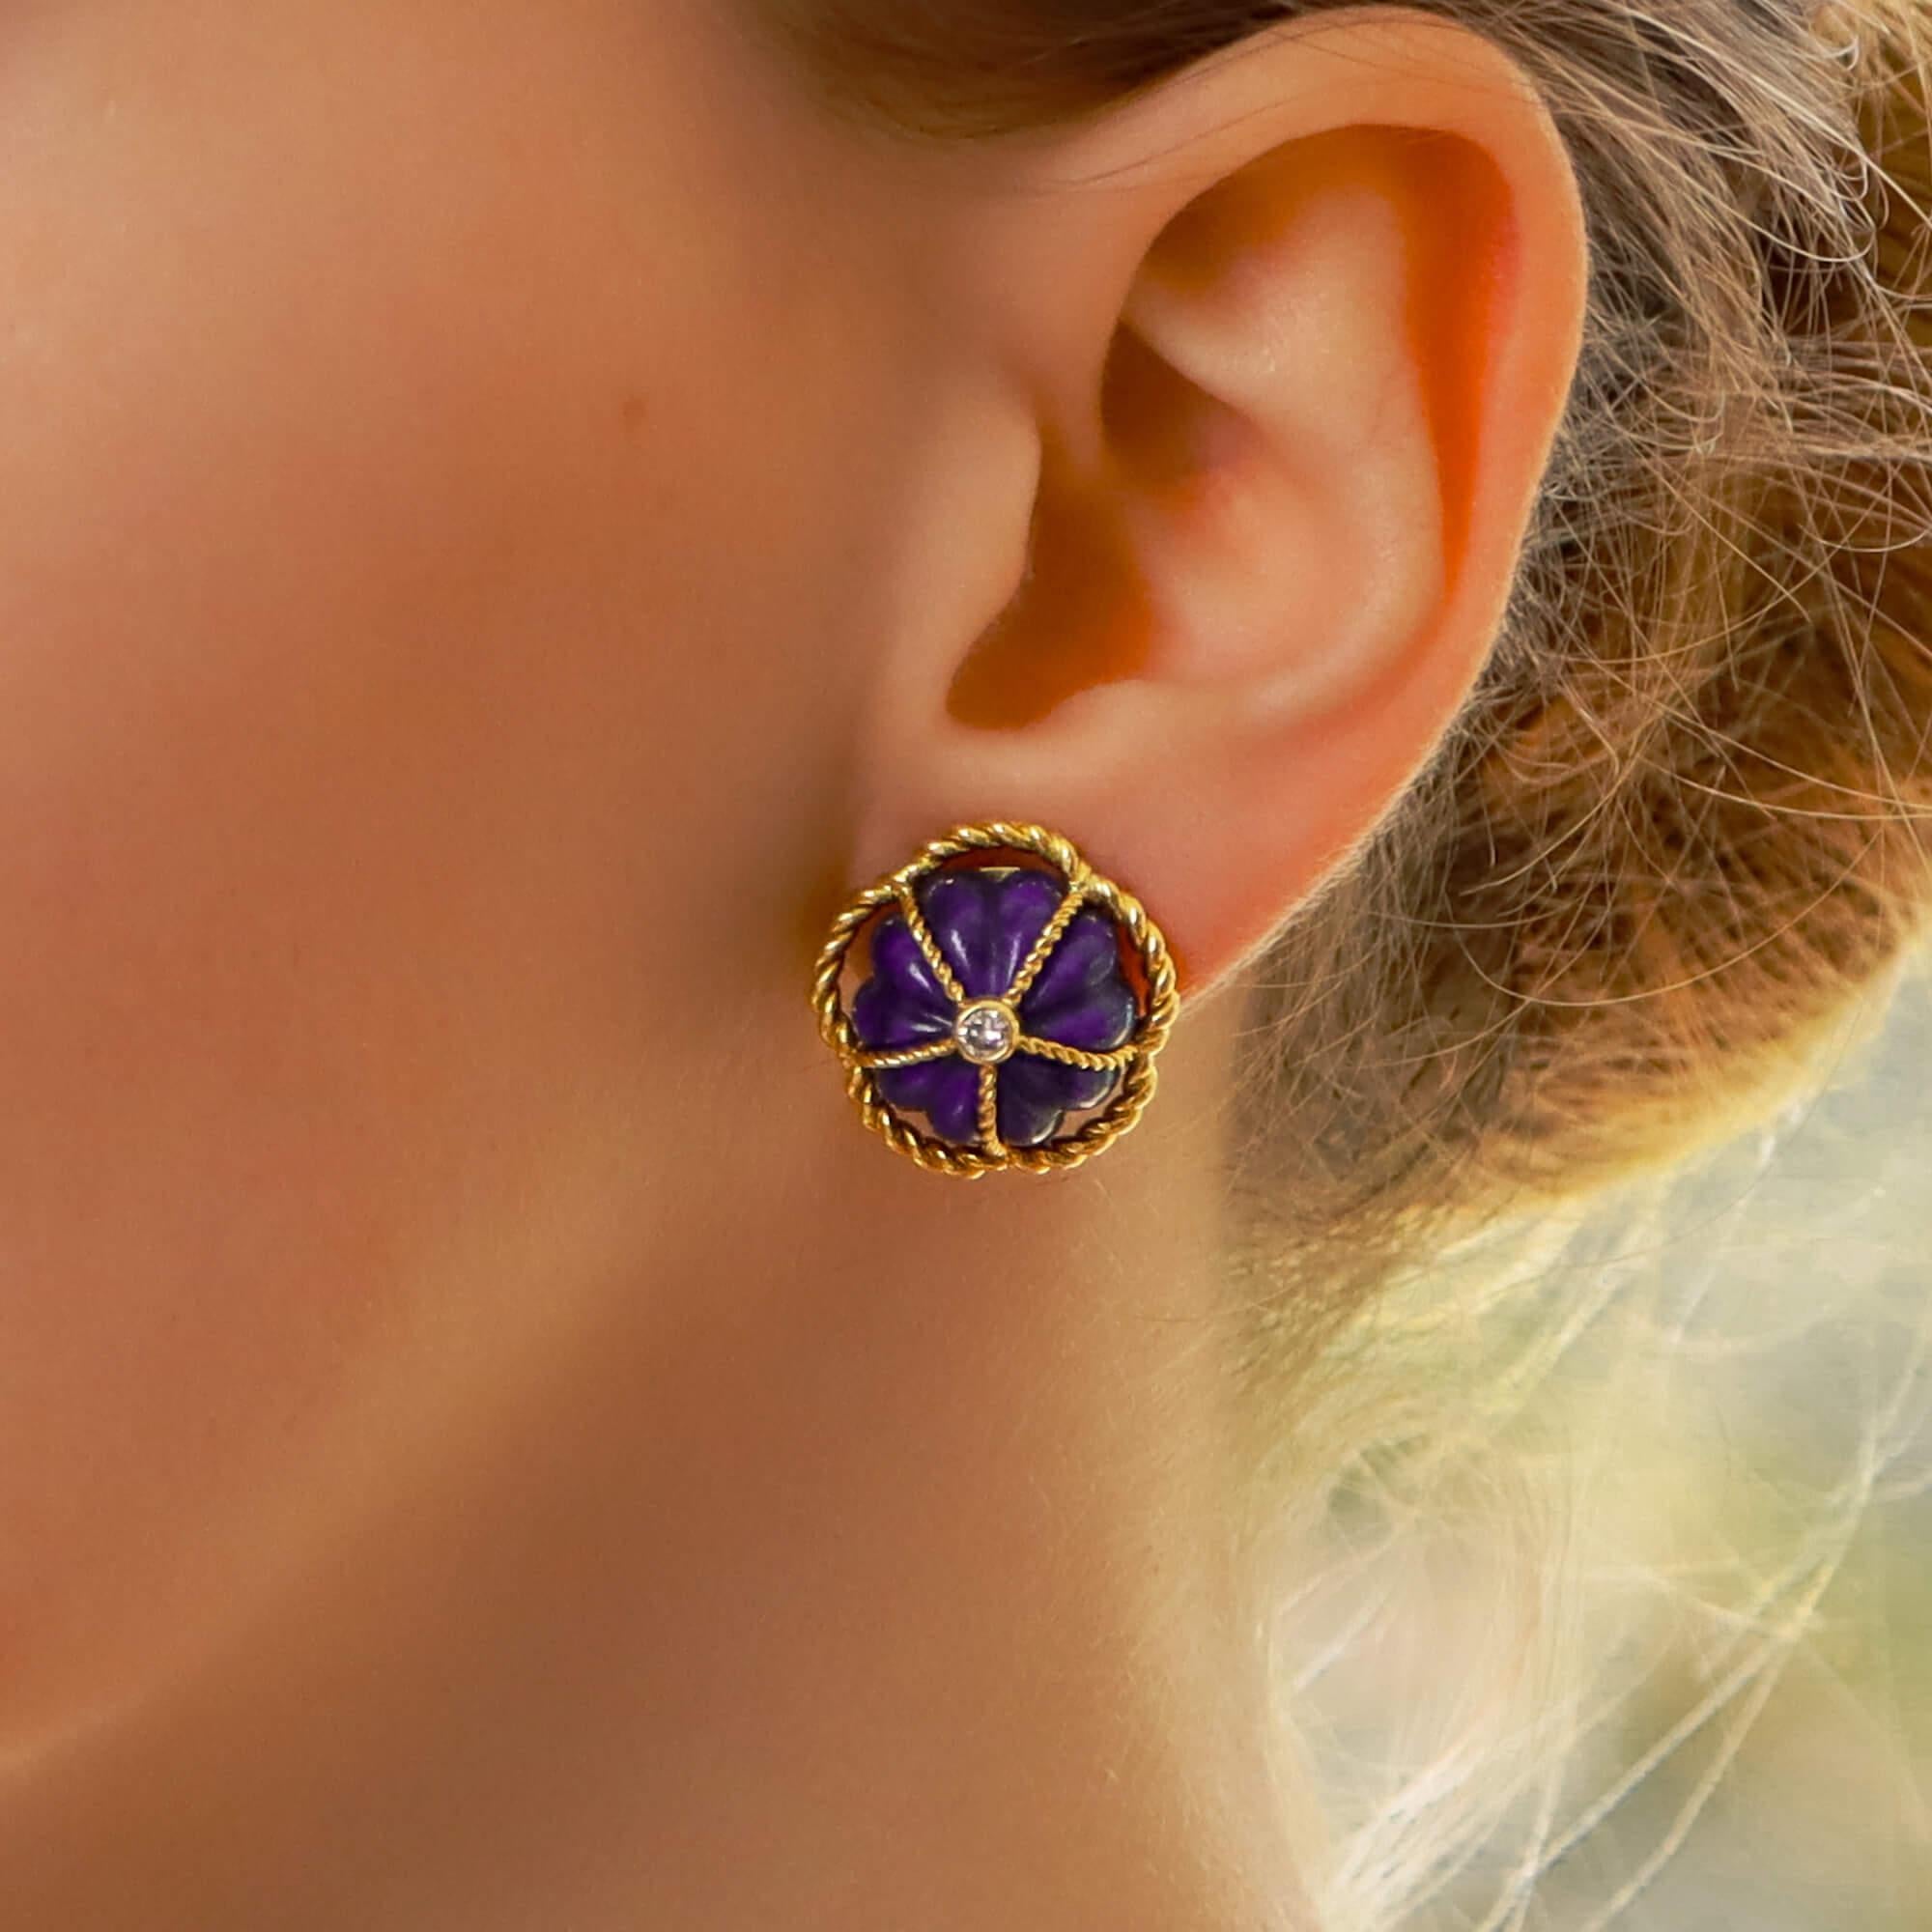 Retro 1970s Lapis Lazuli and Diamond Domed Clip-On Earrings in 18 Karat Yellow Gold